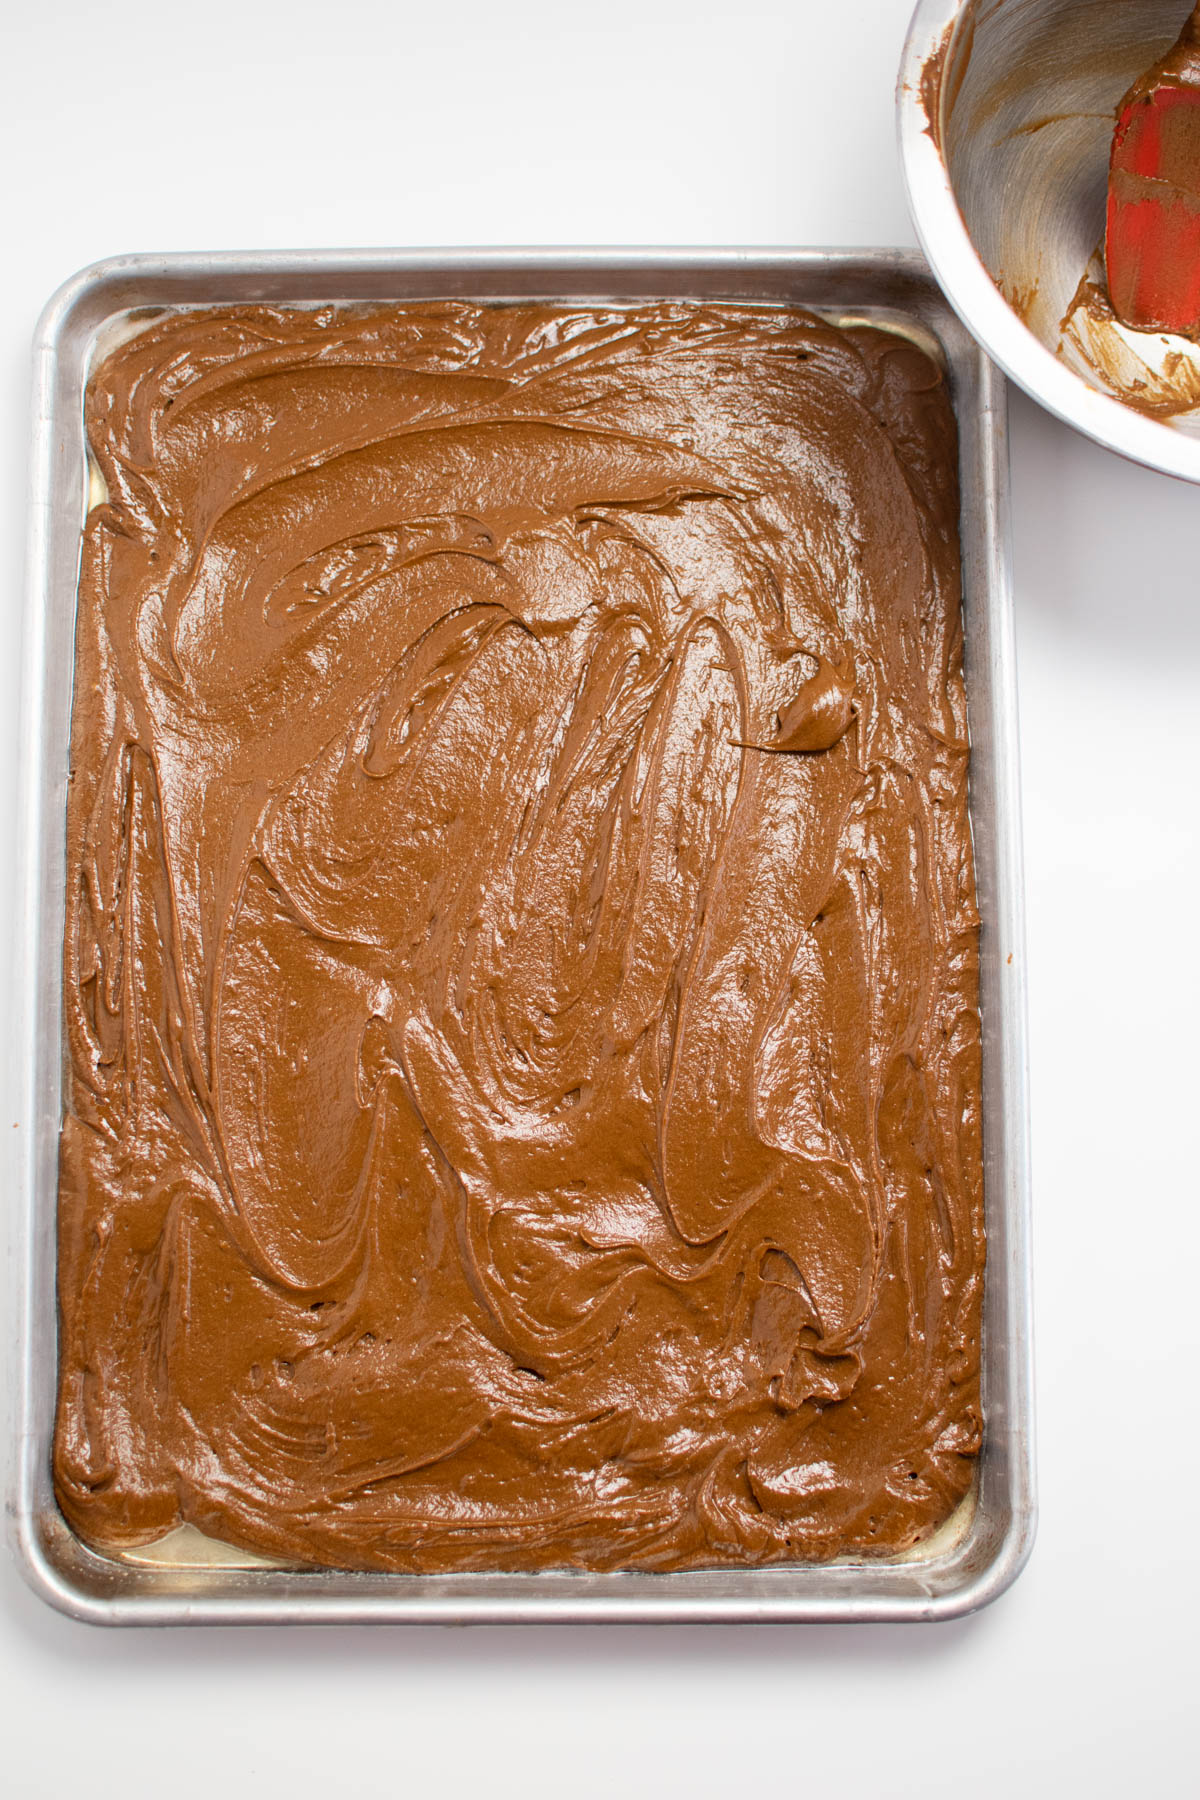 Gingerbread batter in metal sheet pan with empty bowl nearby.